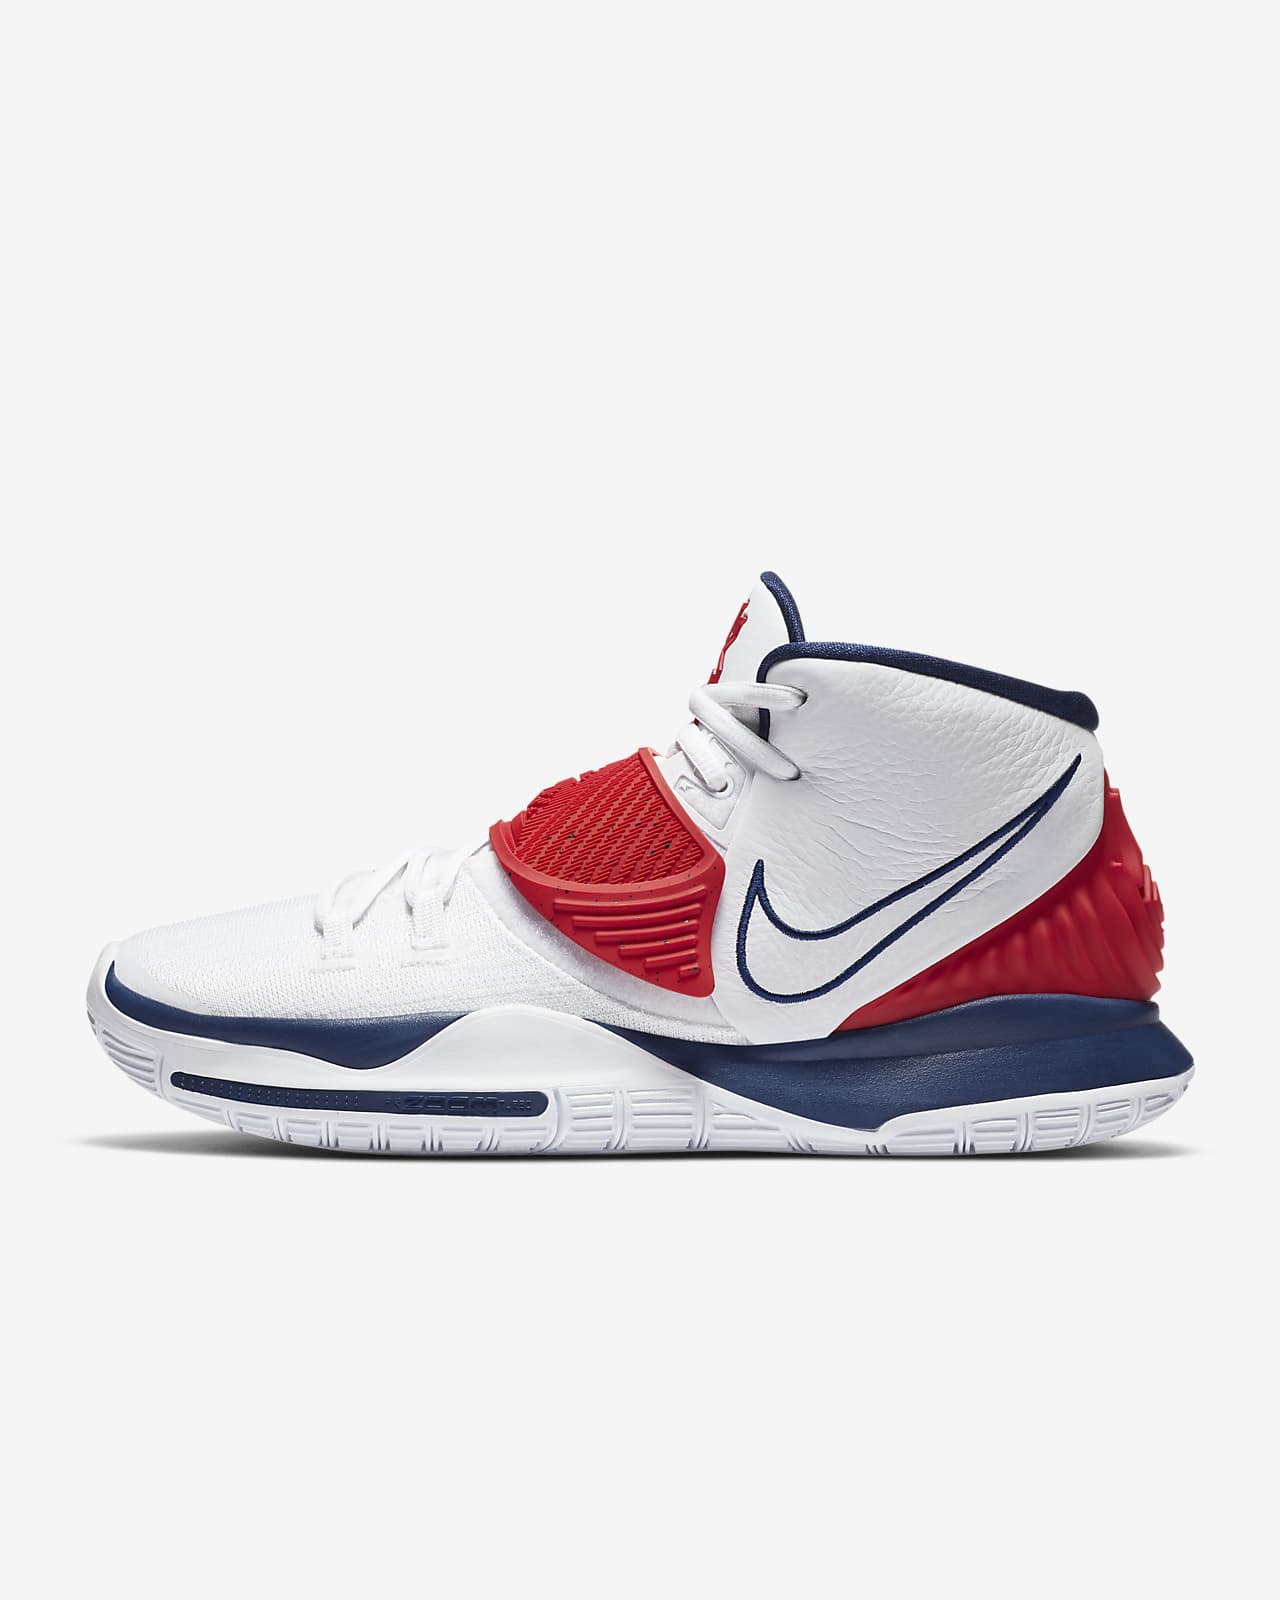 kyrie irving shoes under $50